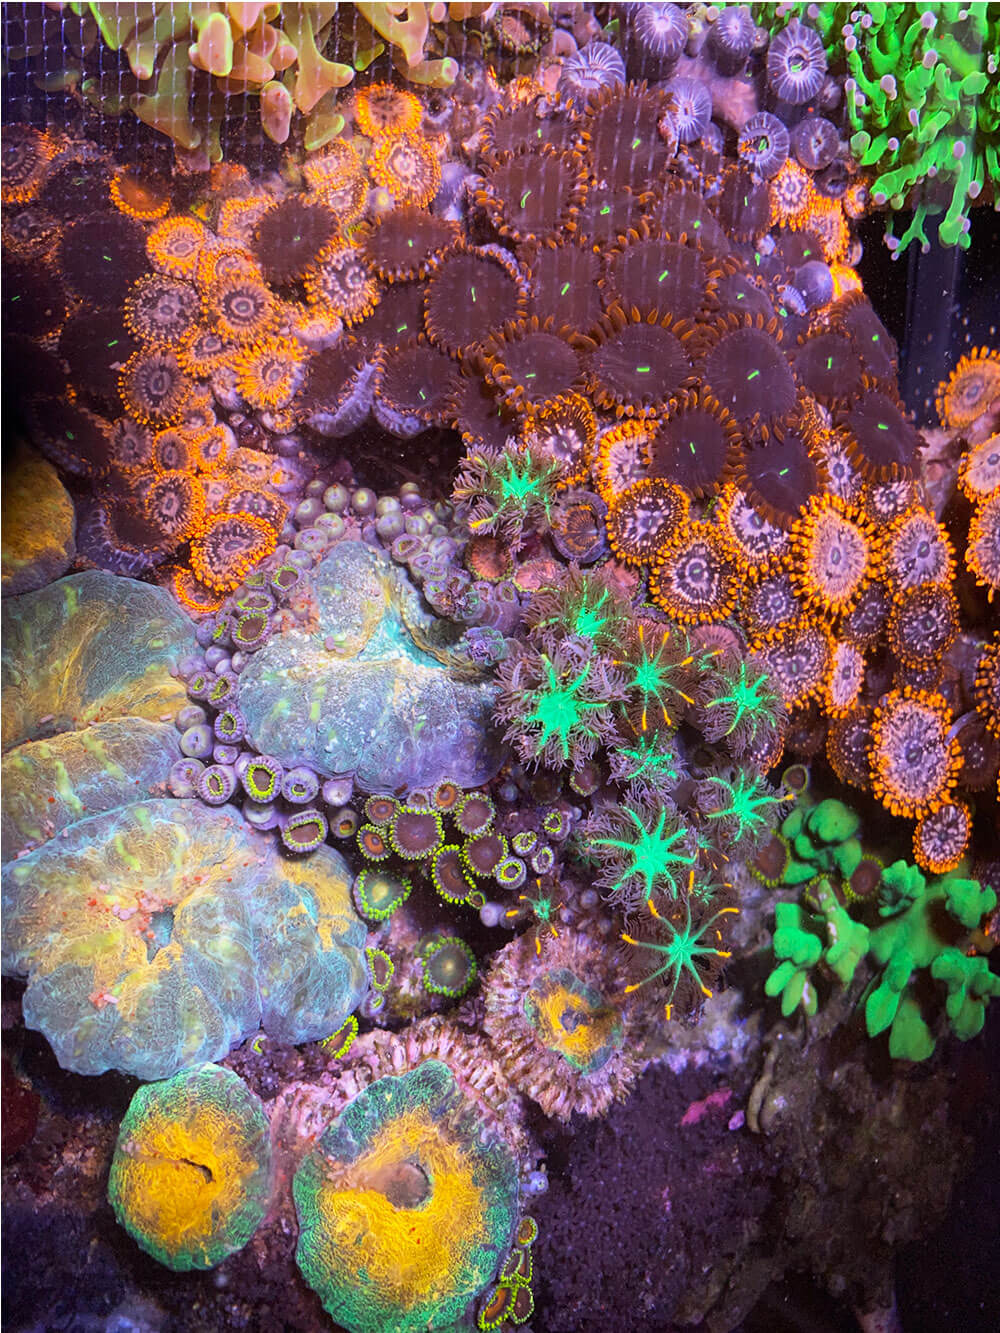 When planned properly a tank can have a variety of mixed corals.